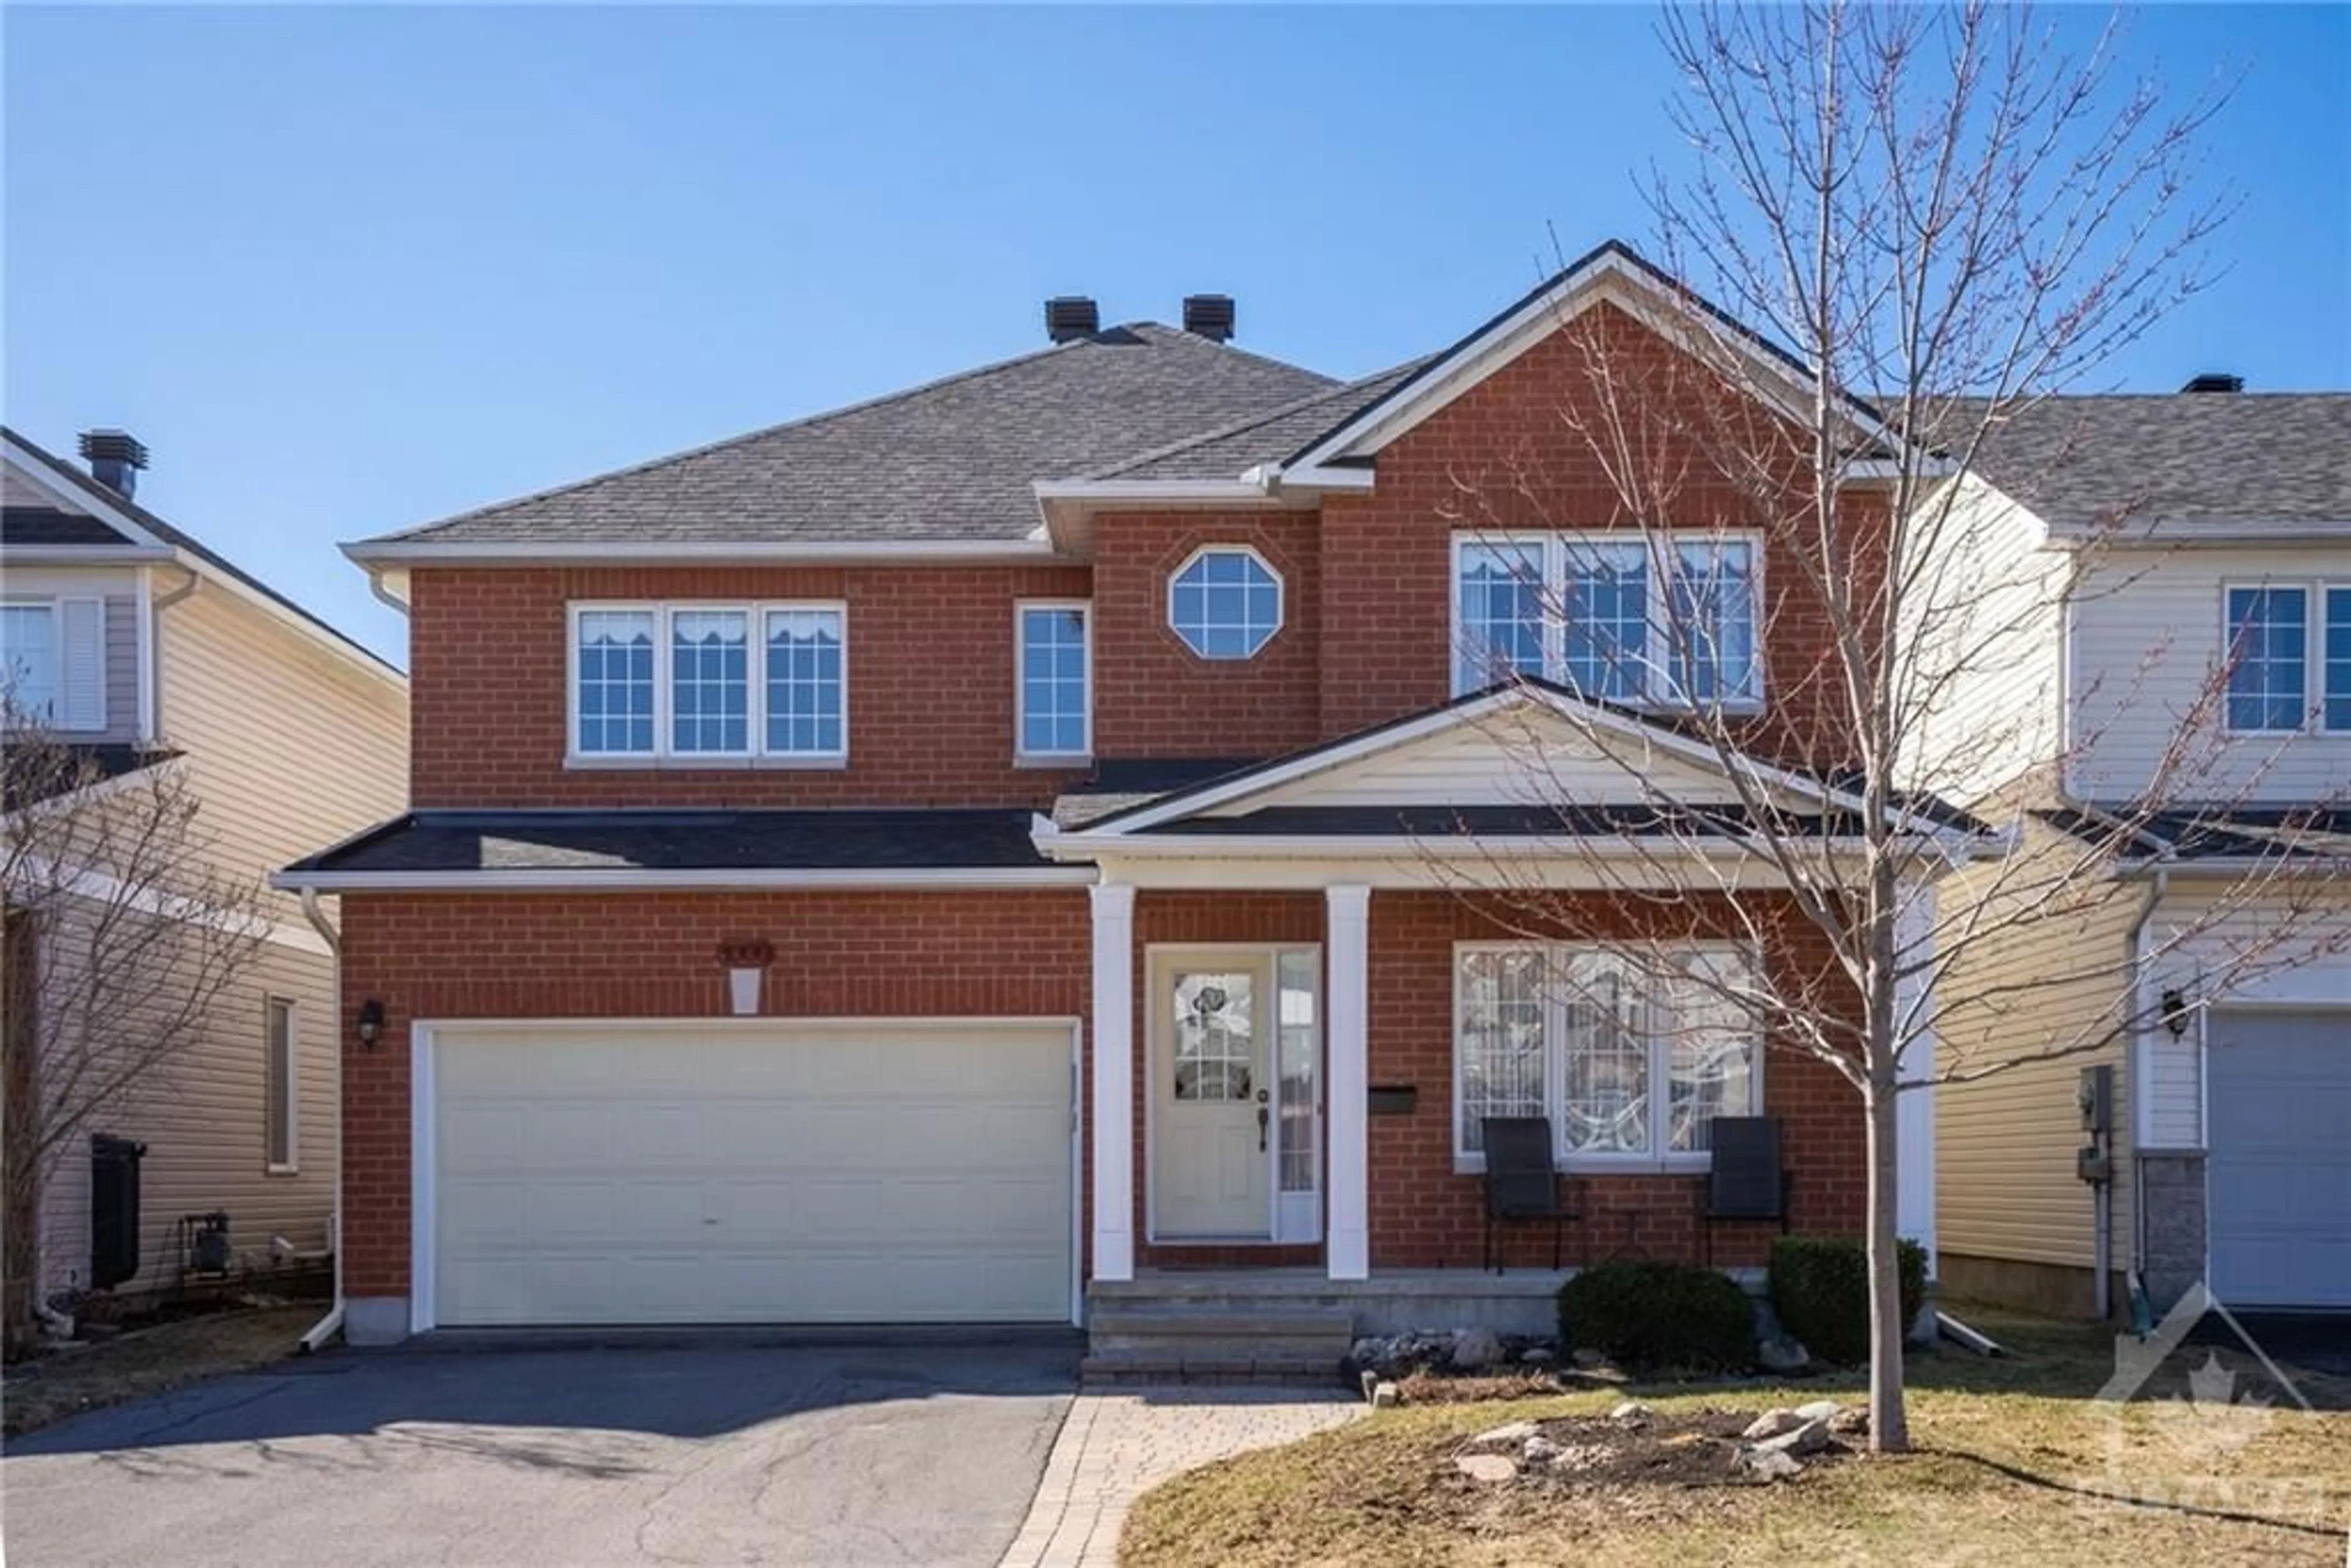 Home with brick exterior material for 1000 SERENITY Ave, Ottawa Ontario K4A 4H3